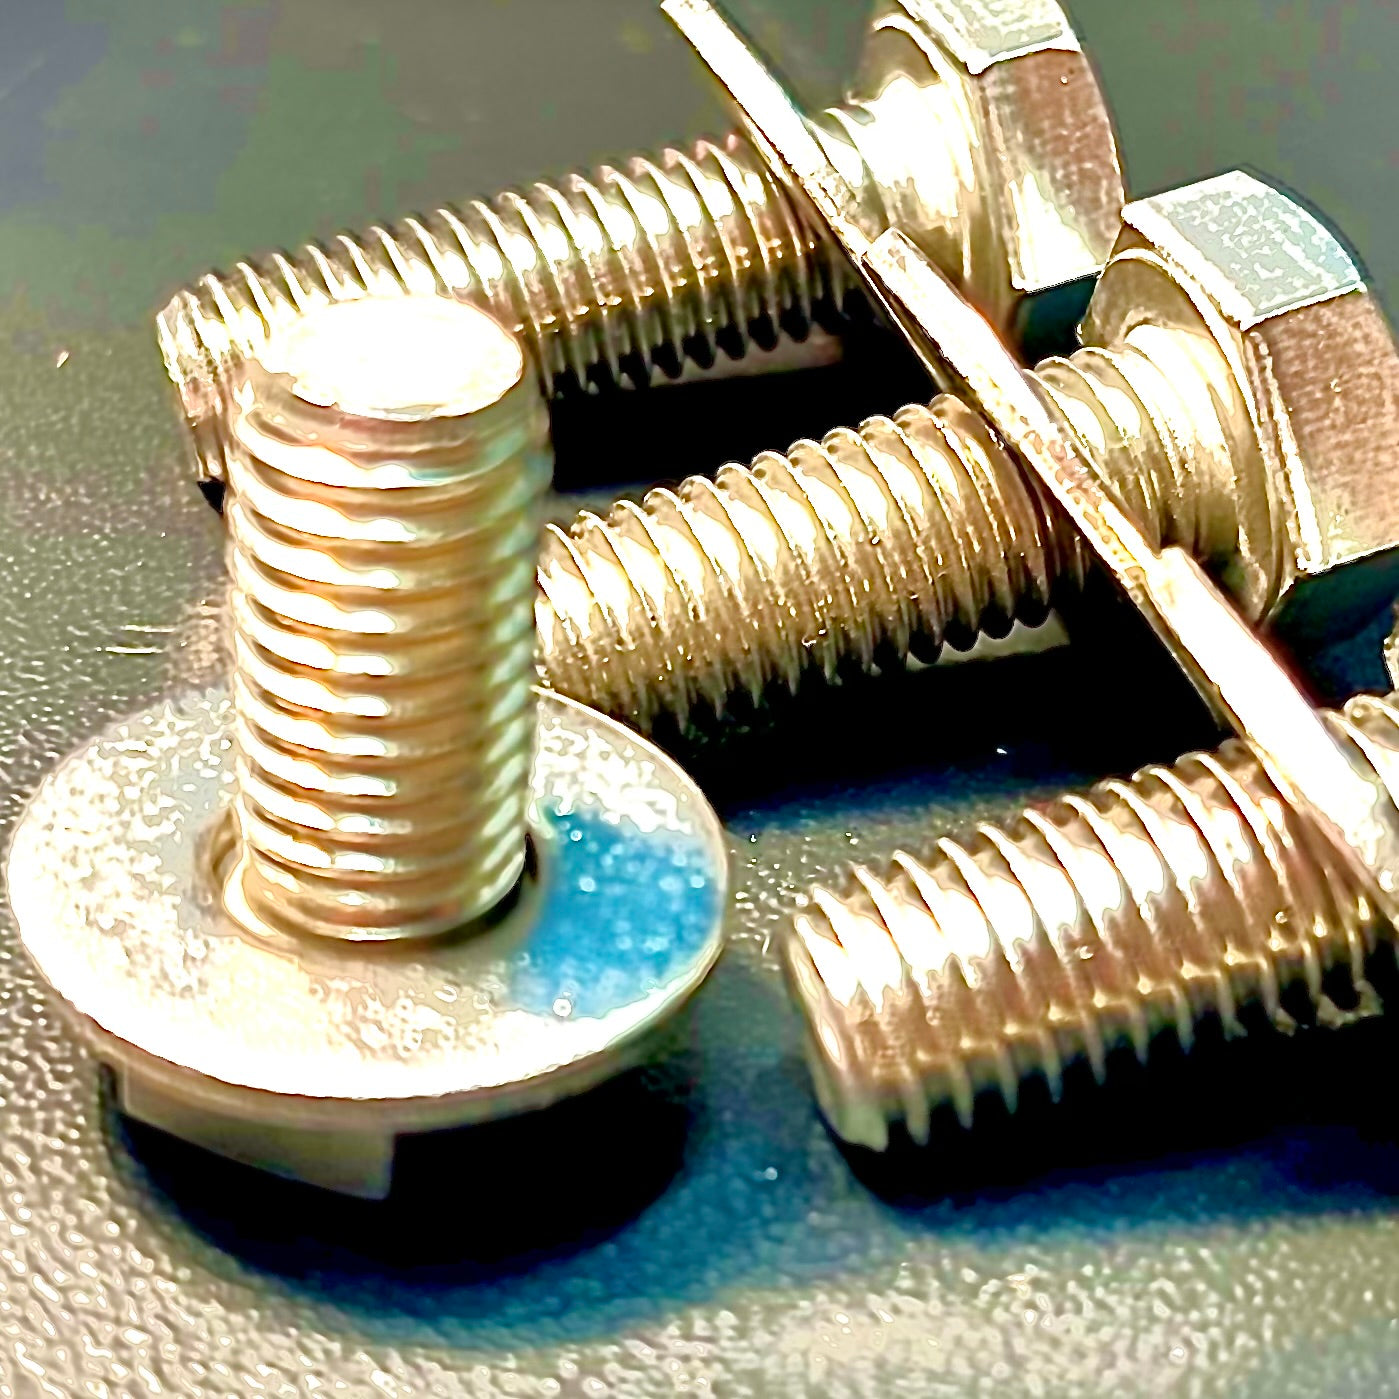 M8xOver 55mm Hex Set Screw Plus Washer A2 304 Stainless - Fixaball Ltd. Fixings and Fasteners UK